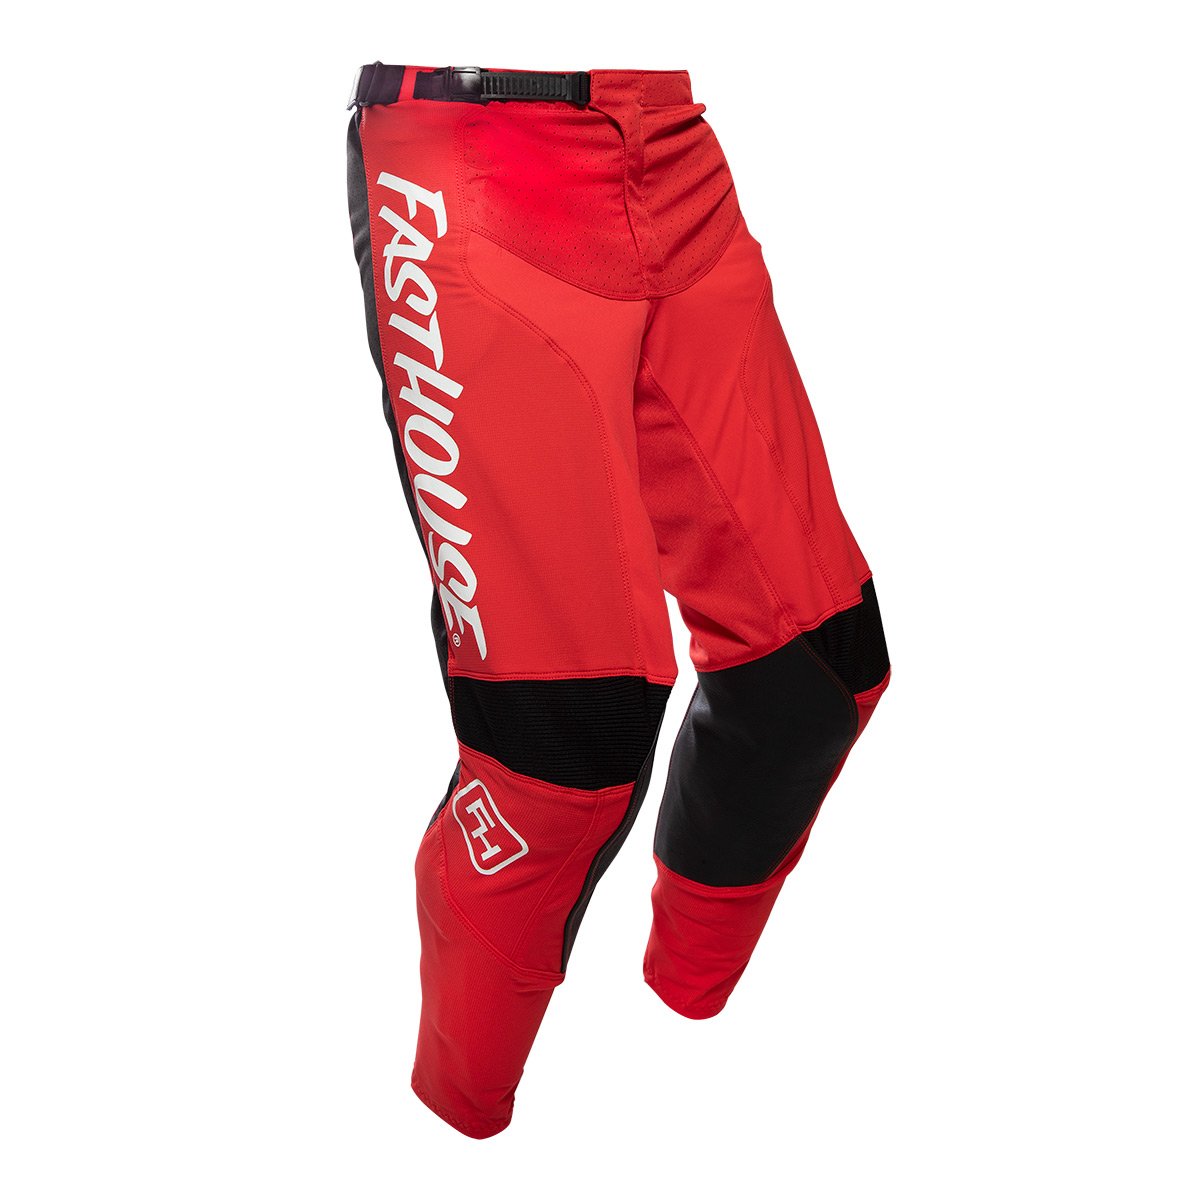 Speed Style Raven Pant - Red/Black